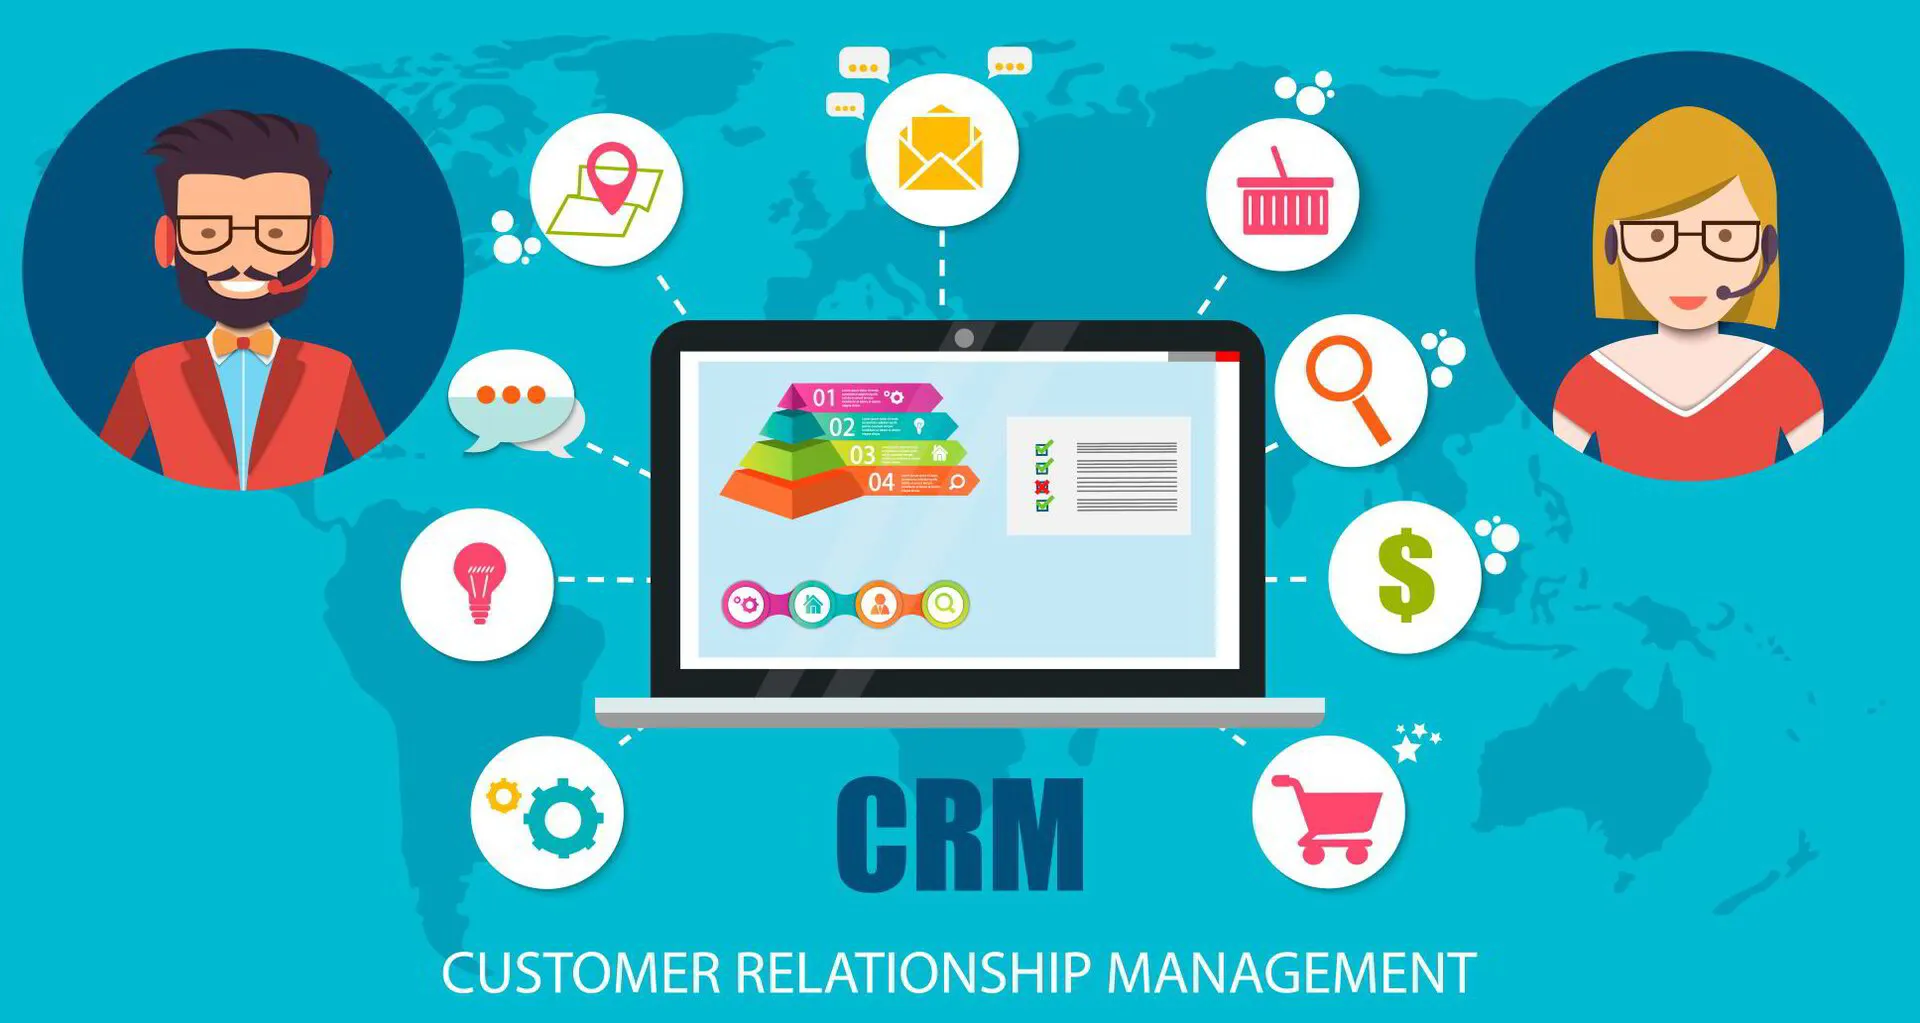 Does your business need a CRM?